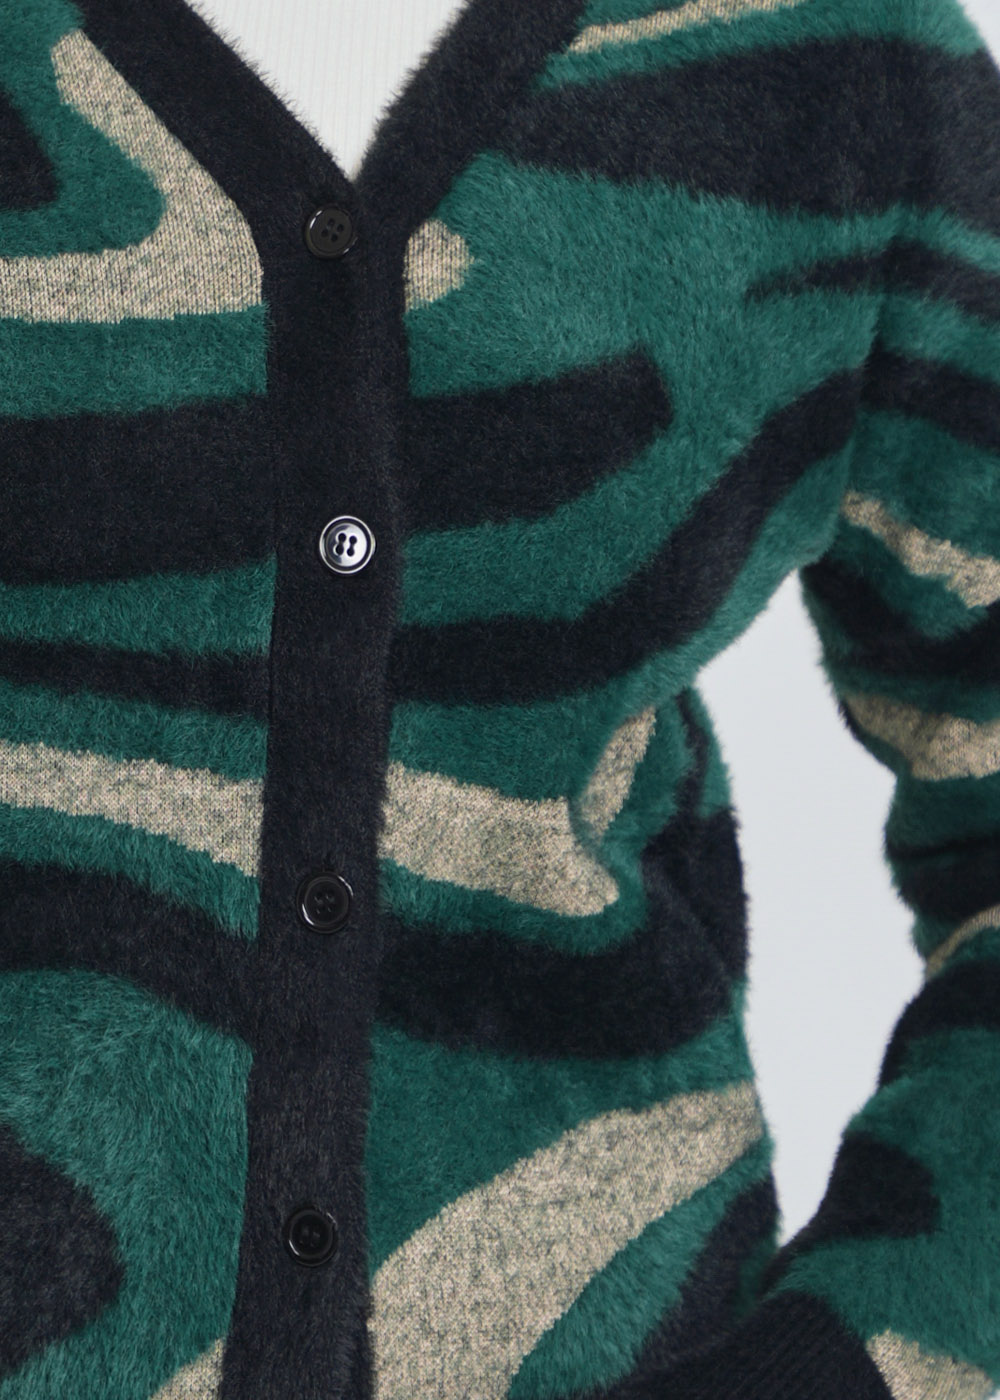 Mixed Green and Black Furry Knit Cardigan